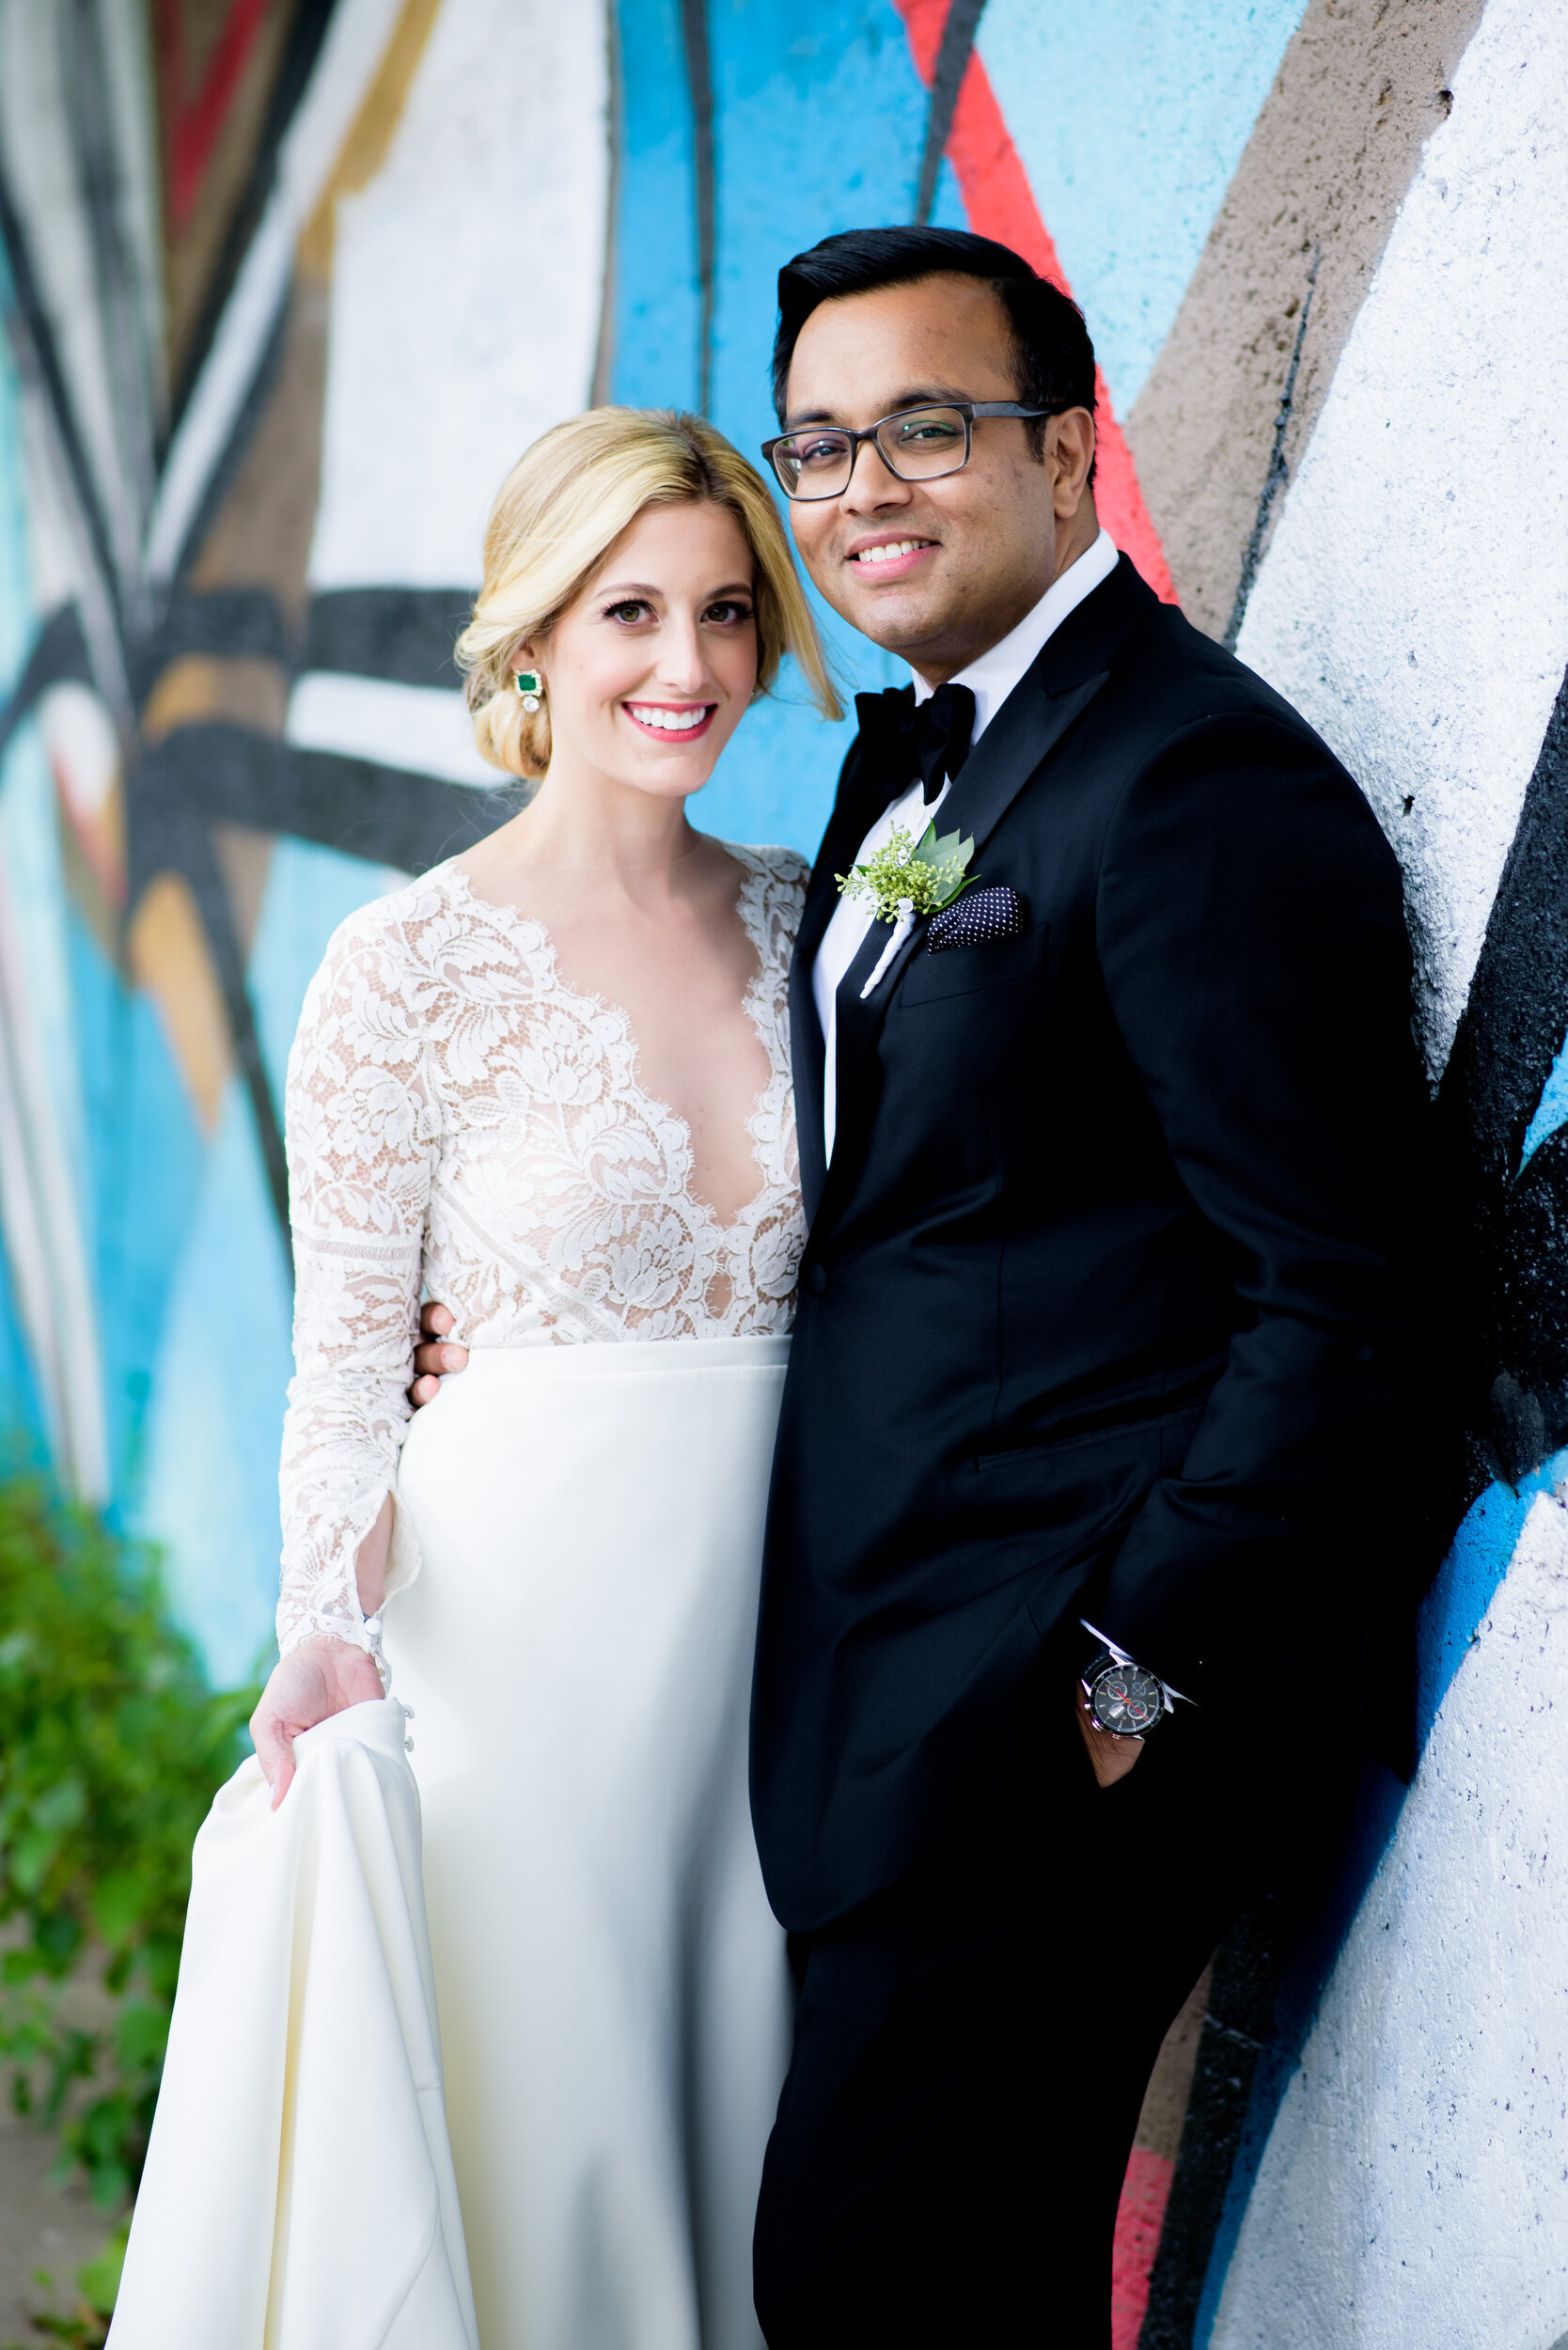 Wedding portrait of the couple with Pilsen street art: Geraghty Chicago wedding photography captured by J. Brown Photography.